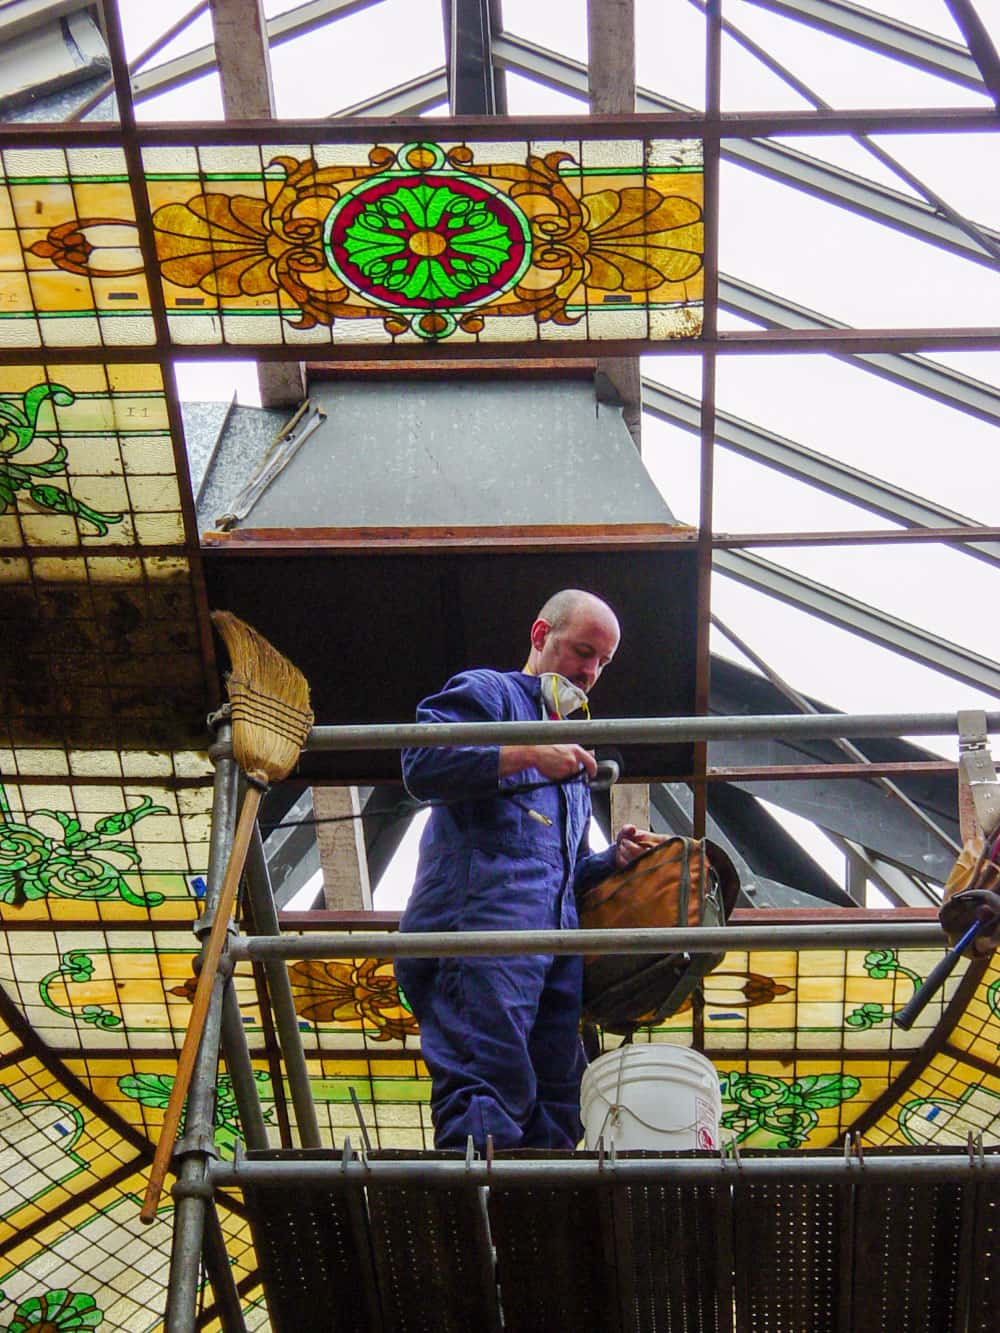 Workers on scaffolding install a section of stained glass in the dome of the San Mateo County Courtroom A